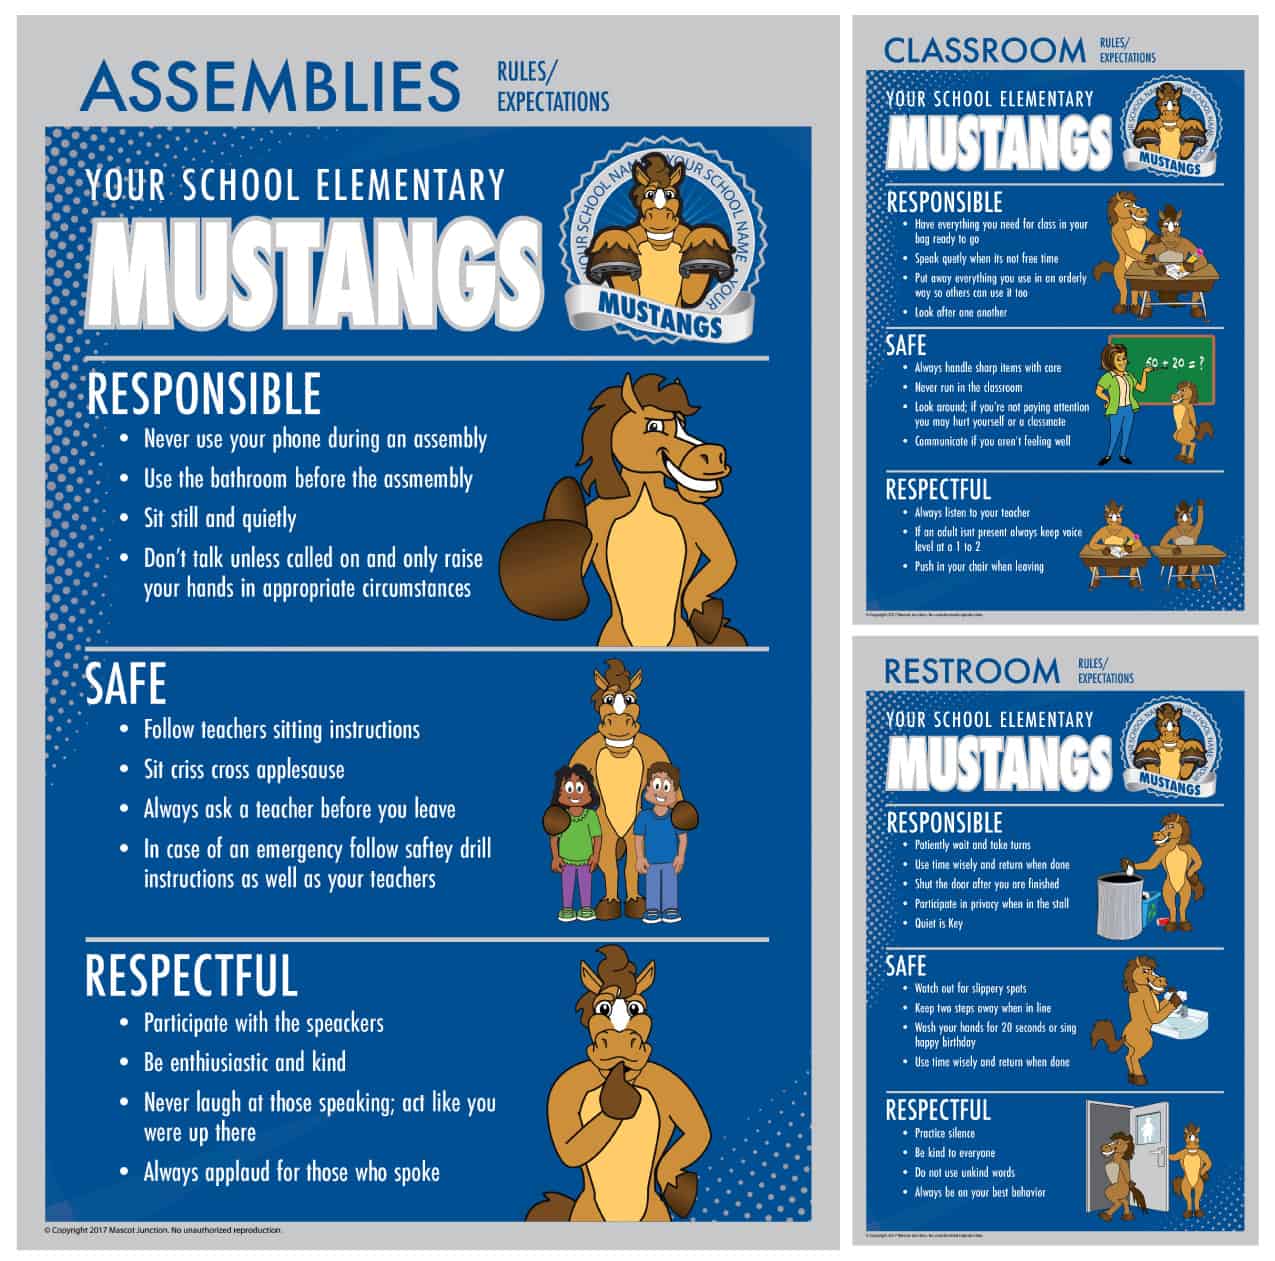 Rules-posters_Mustang